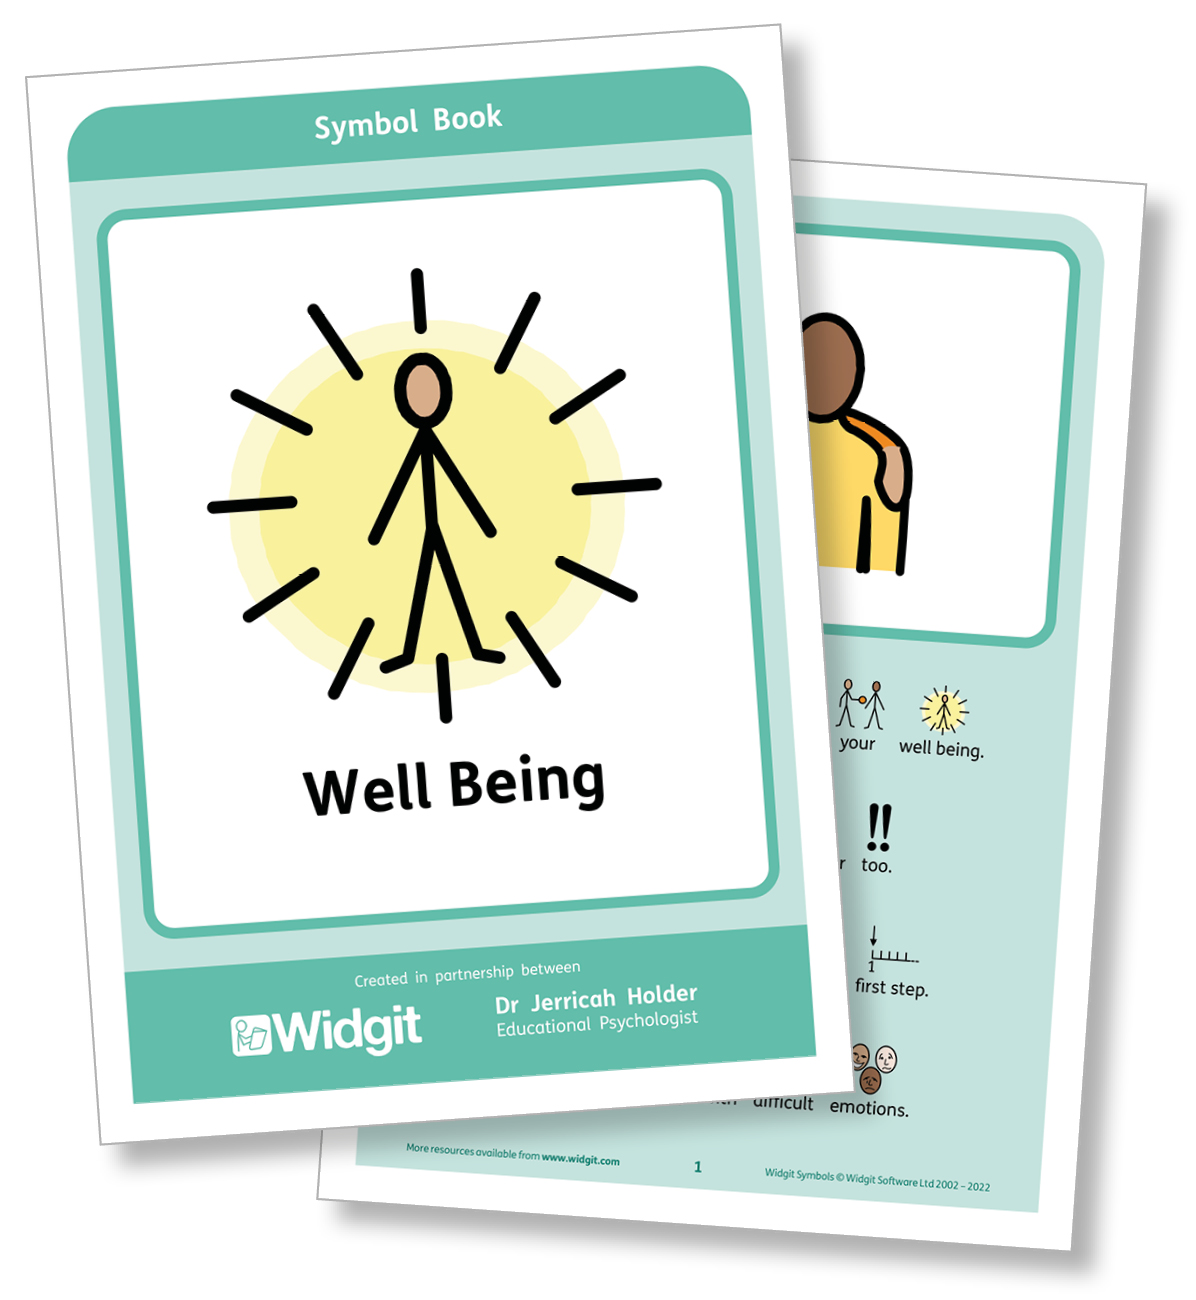 Well being symbol-supported book page 1 